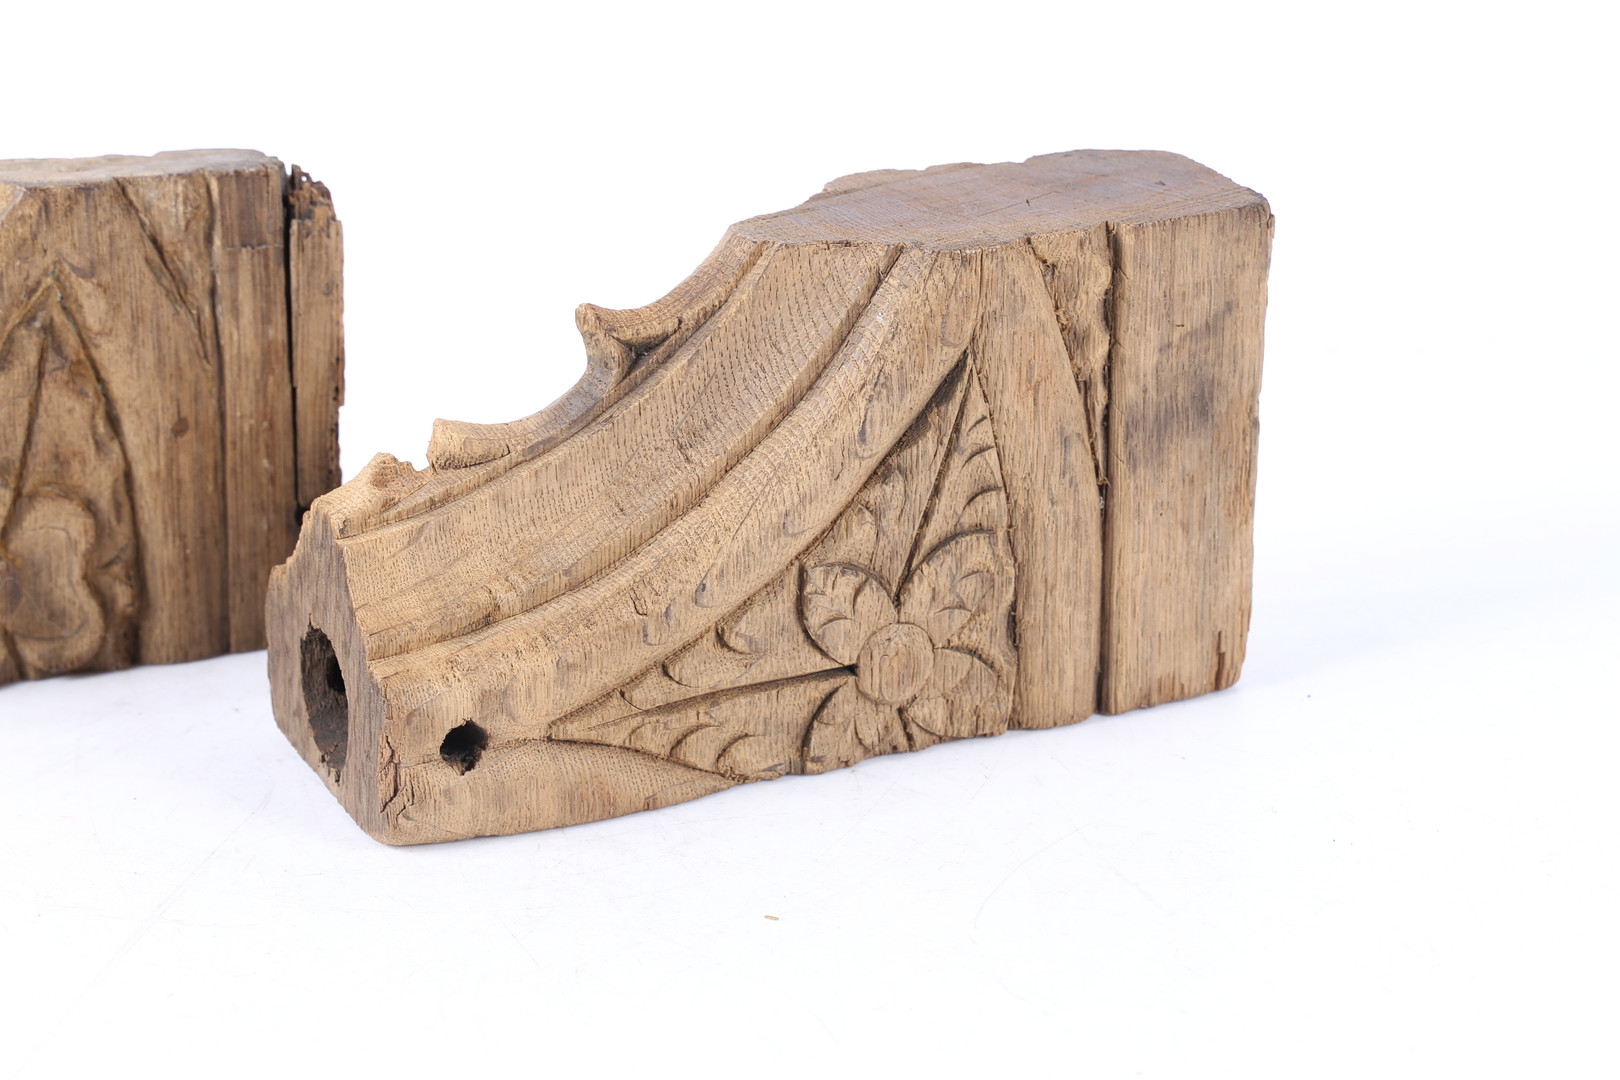 A PAIR OF 15TH CENTURY ENGLISH CARVED OAK CORNER SPANDRELS. - Image 3 of 7